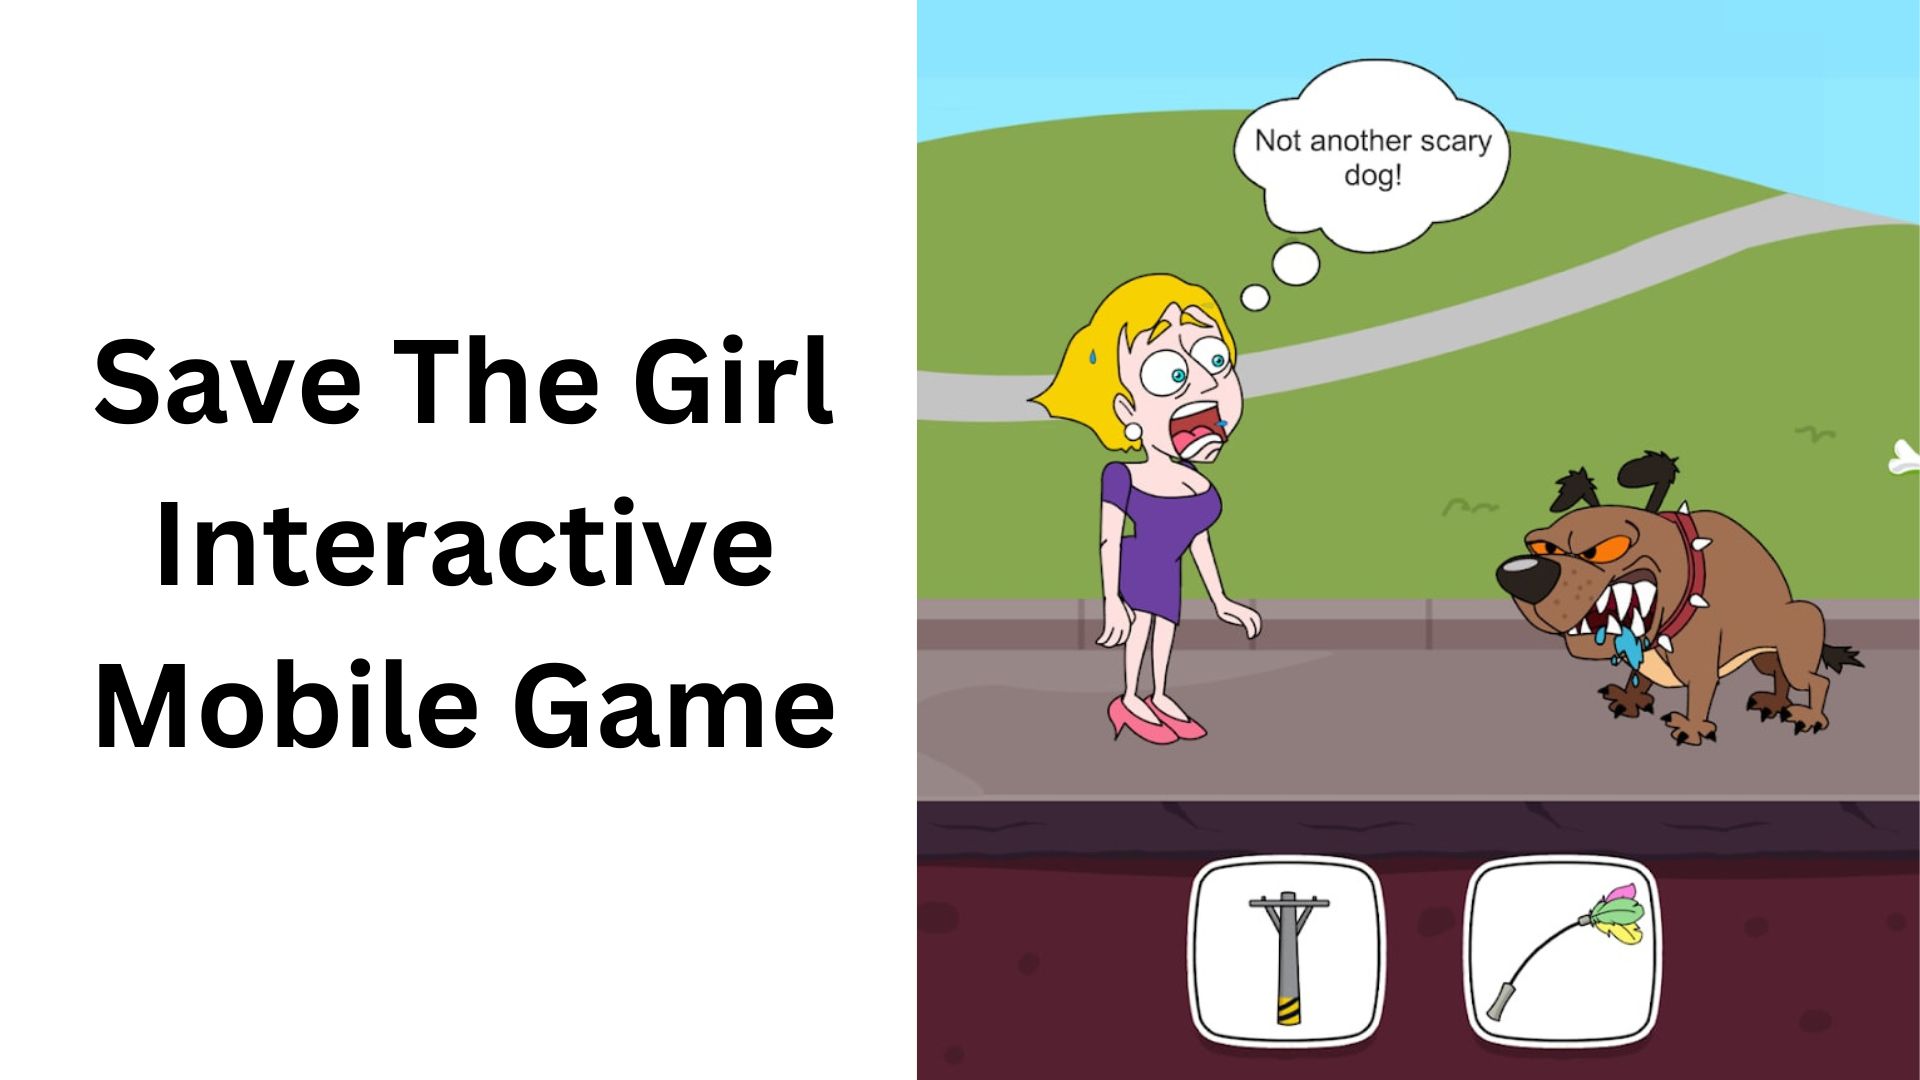 Save The Girl Interactive Mobile Game